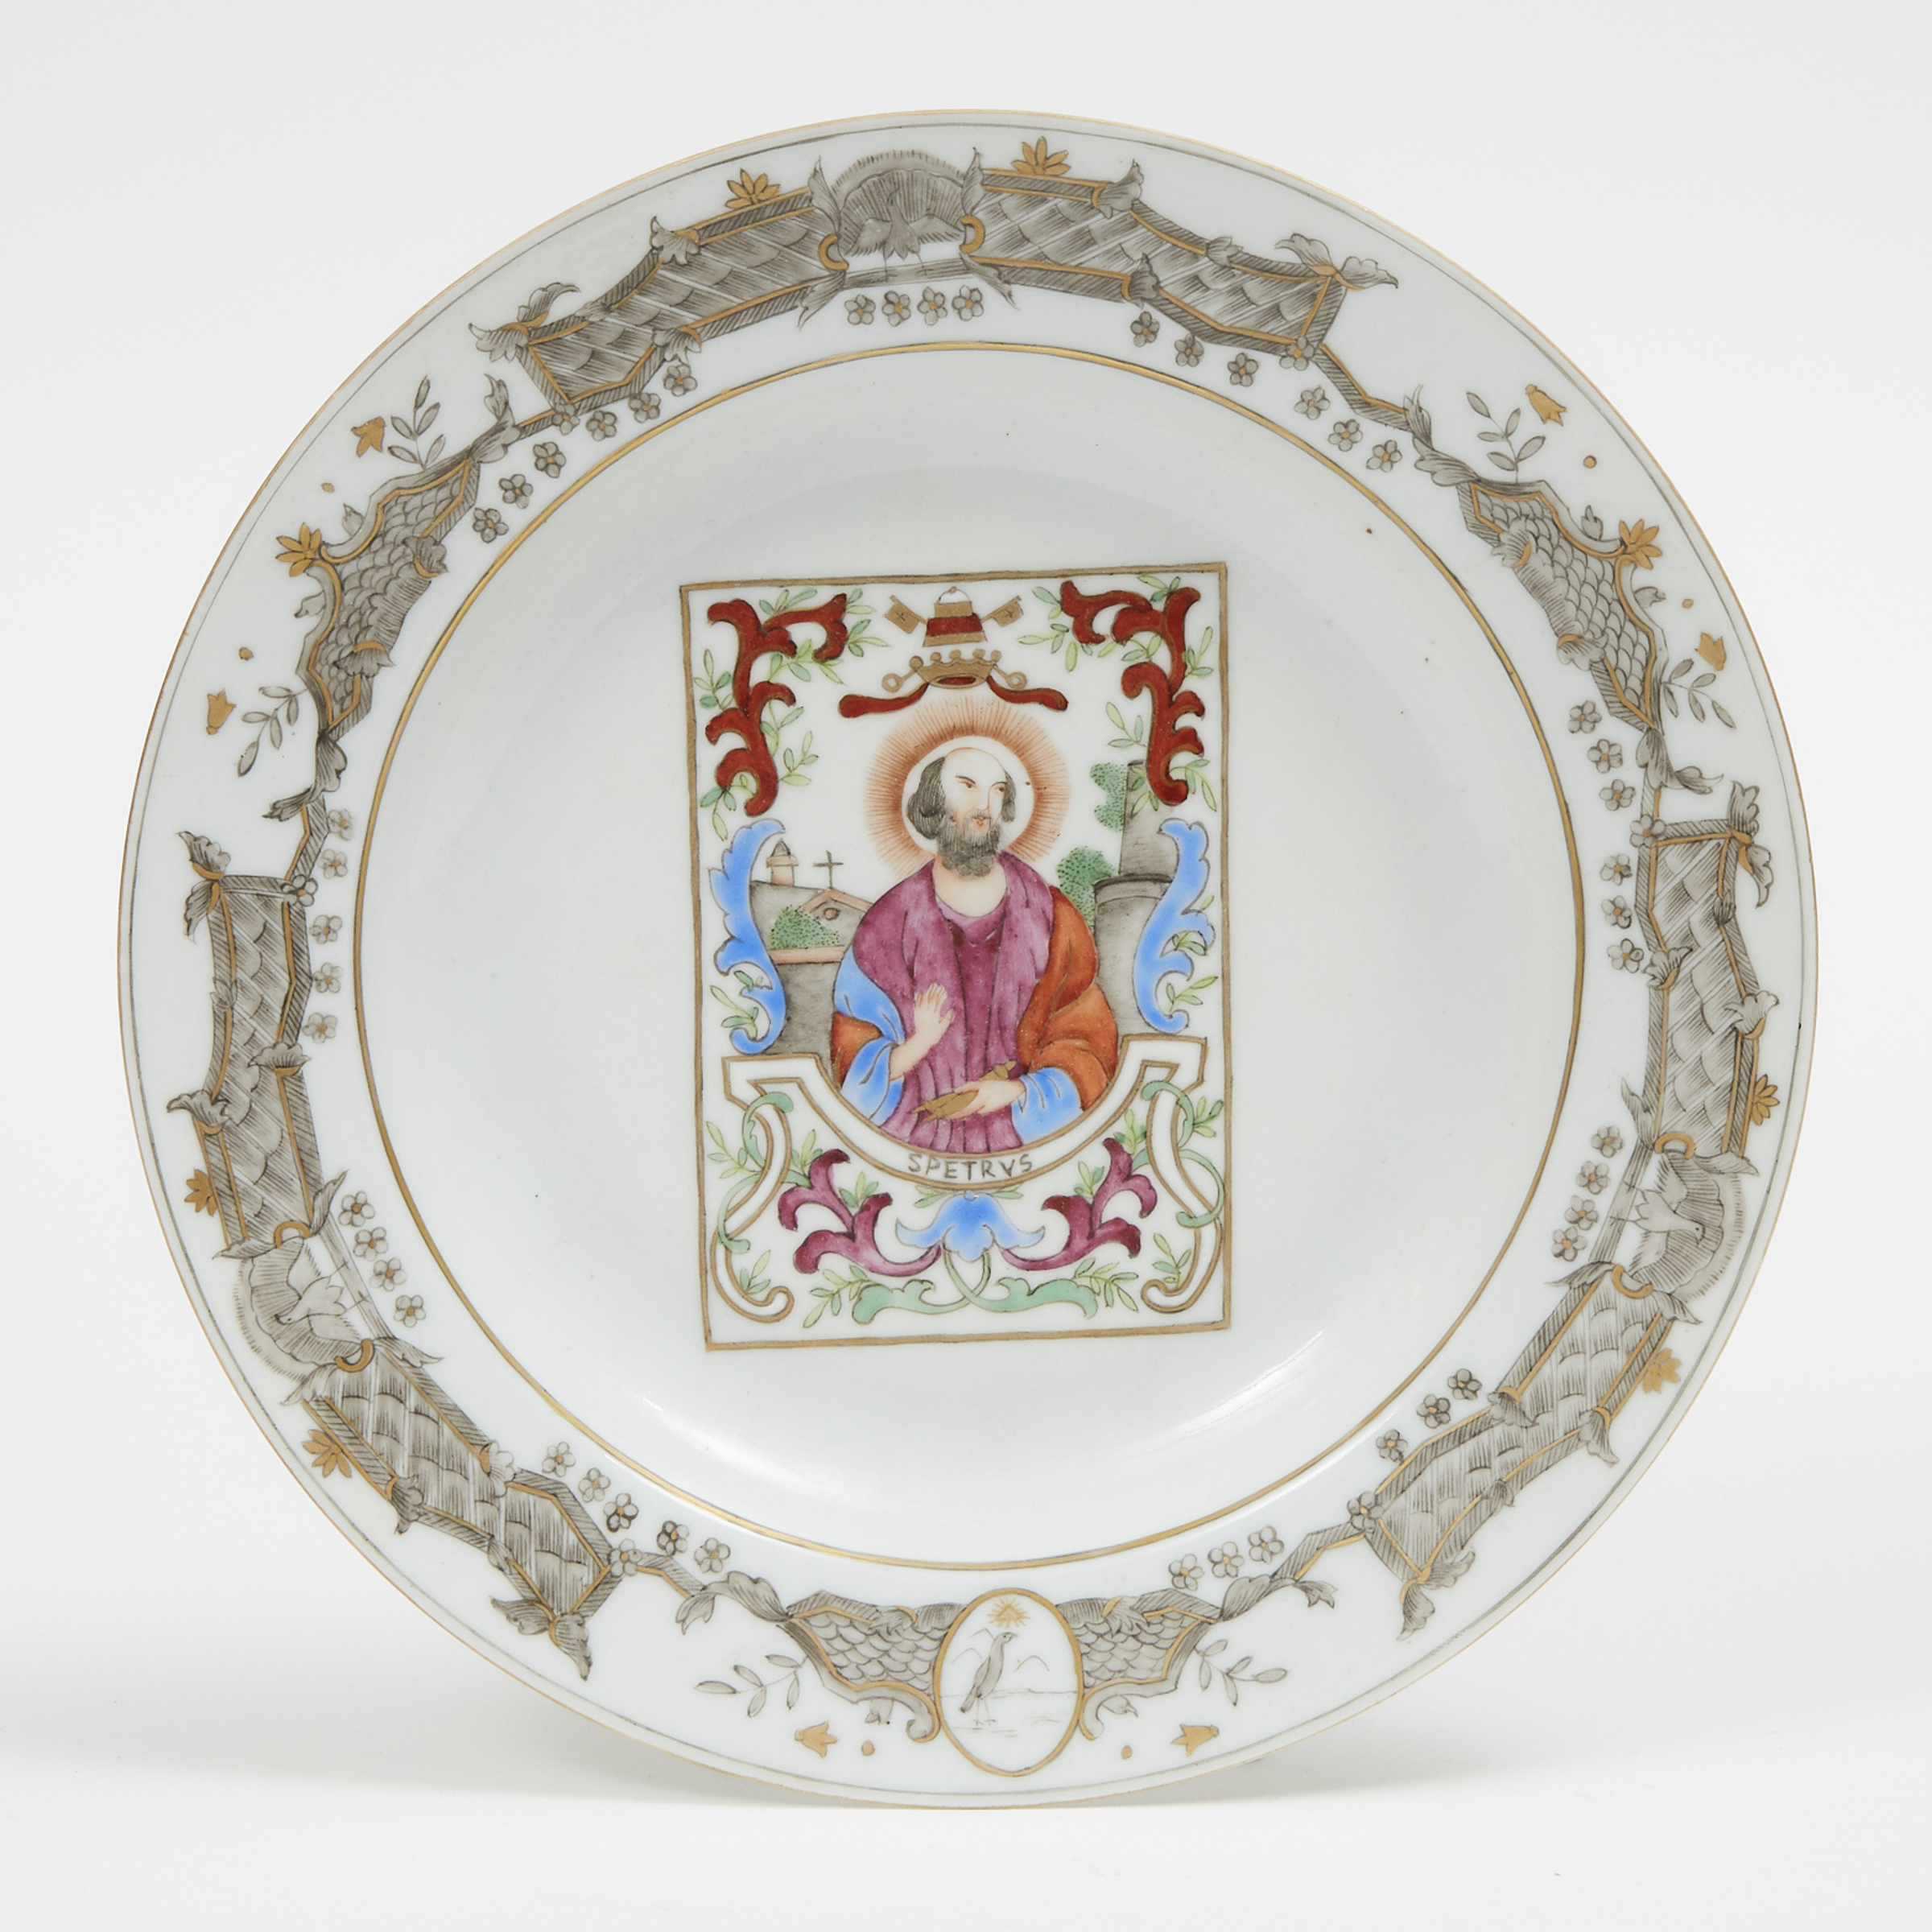 A Chinese Export Porcelain 'Apostle' Plate